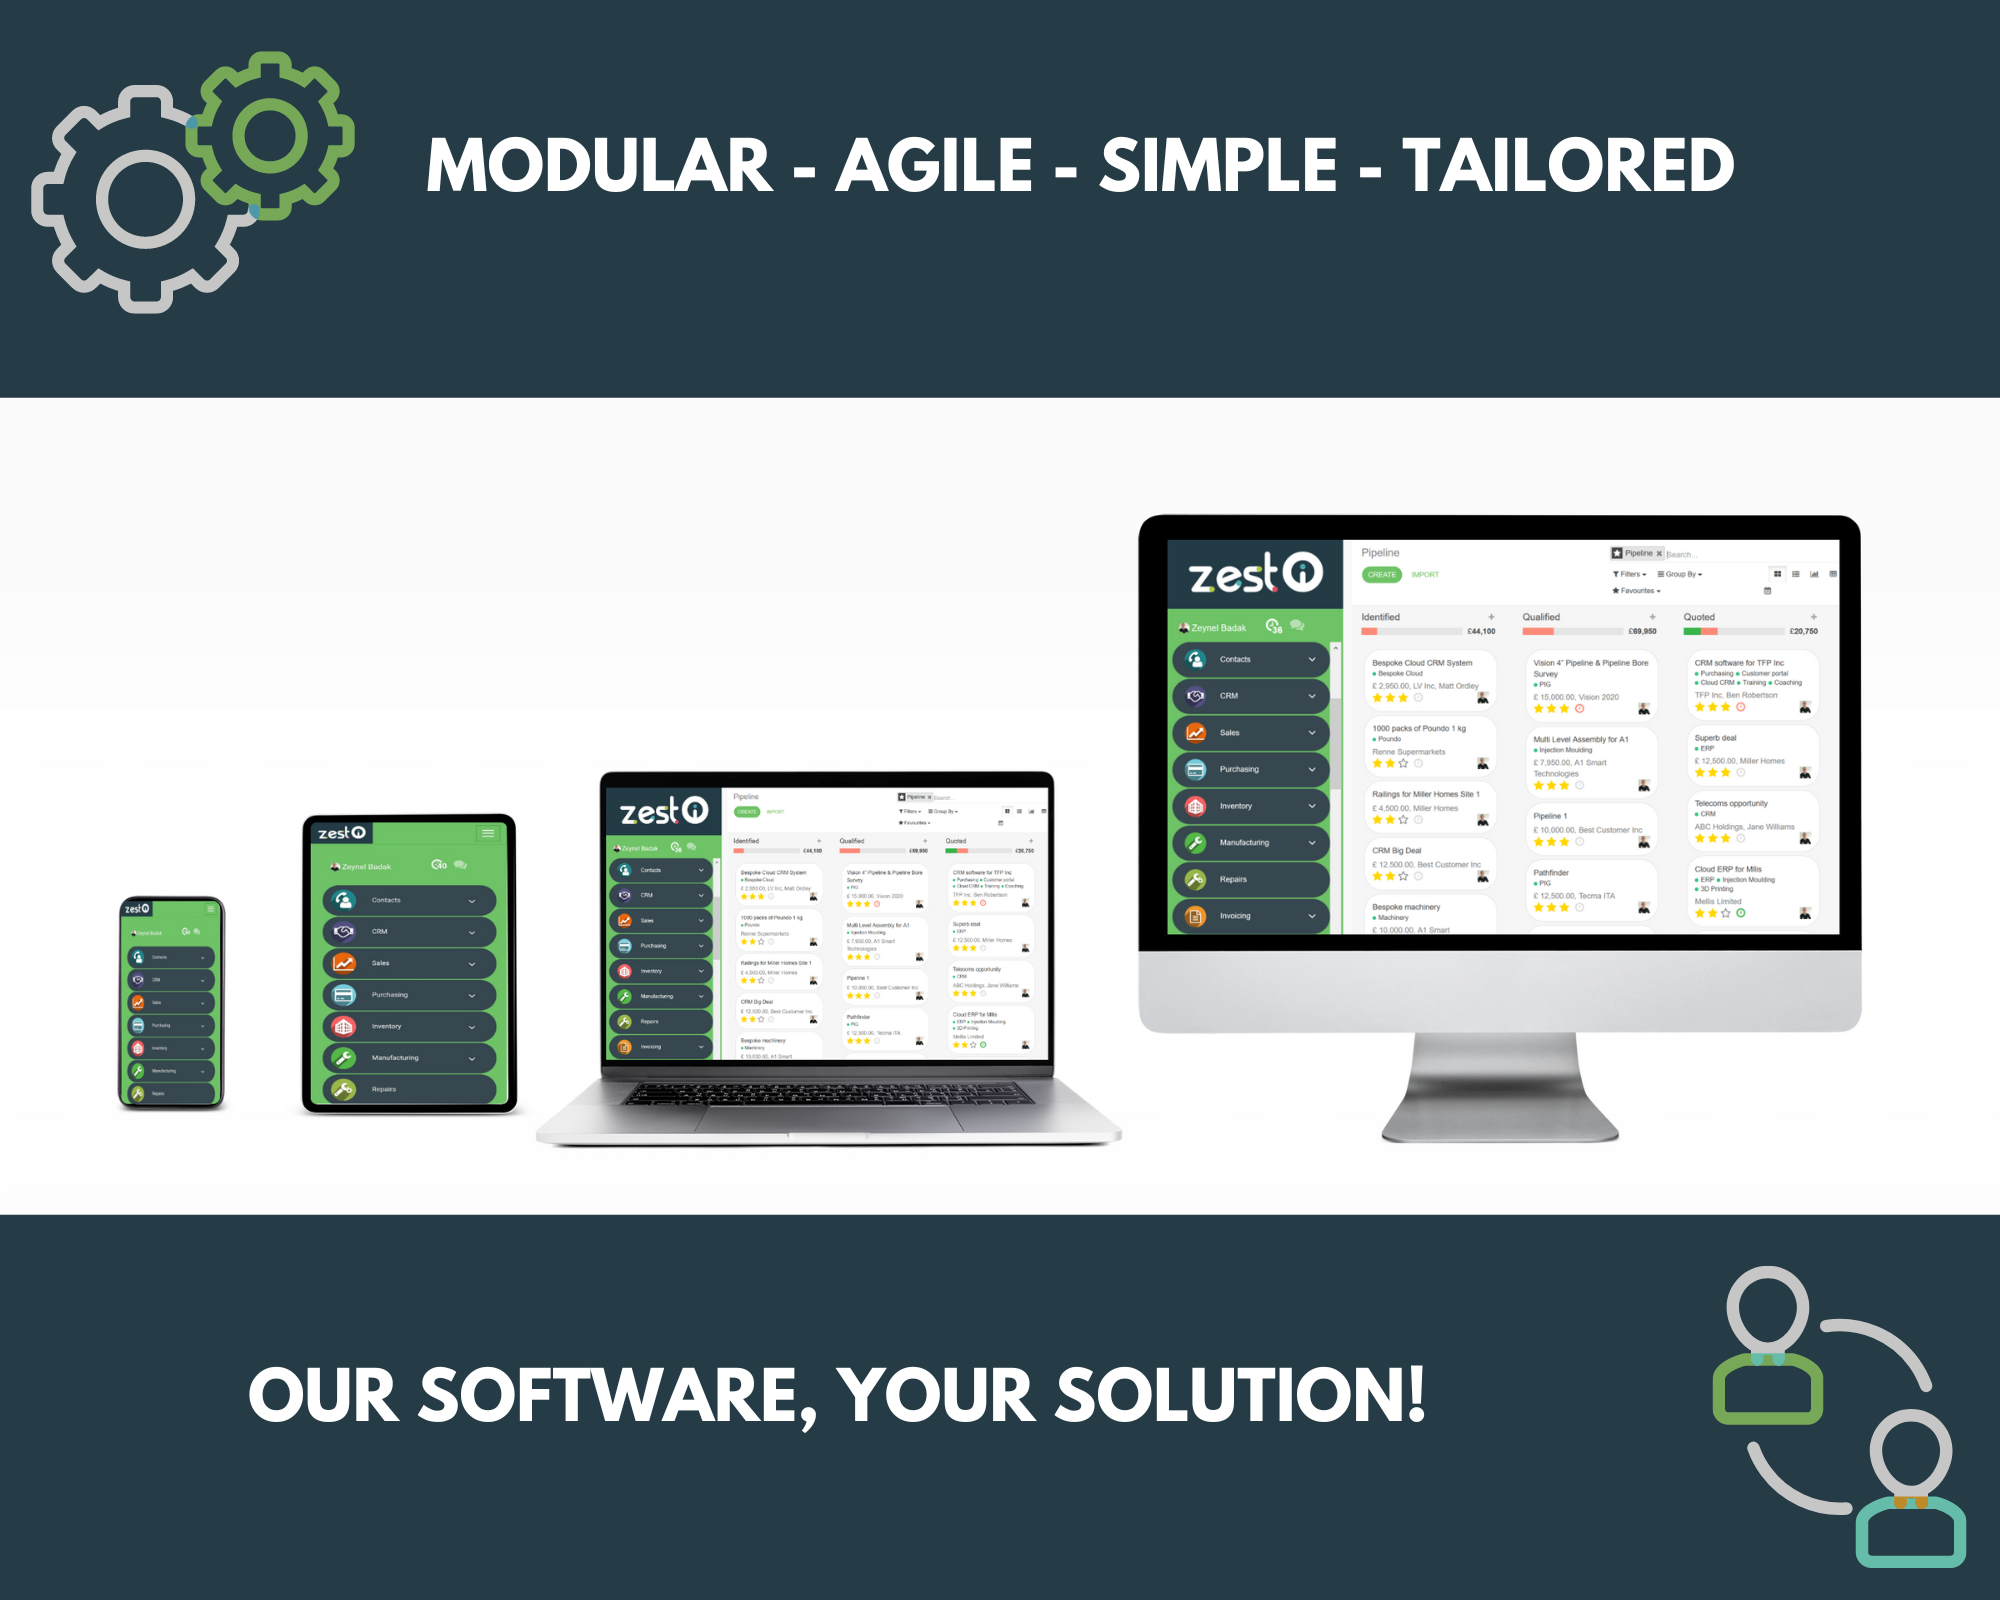 Our Software Your Solution